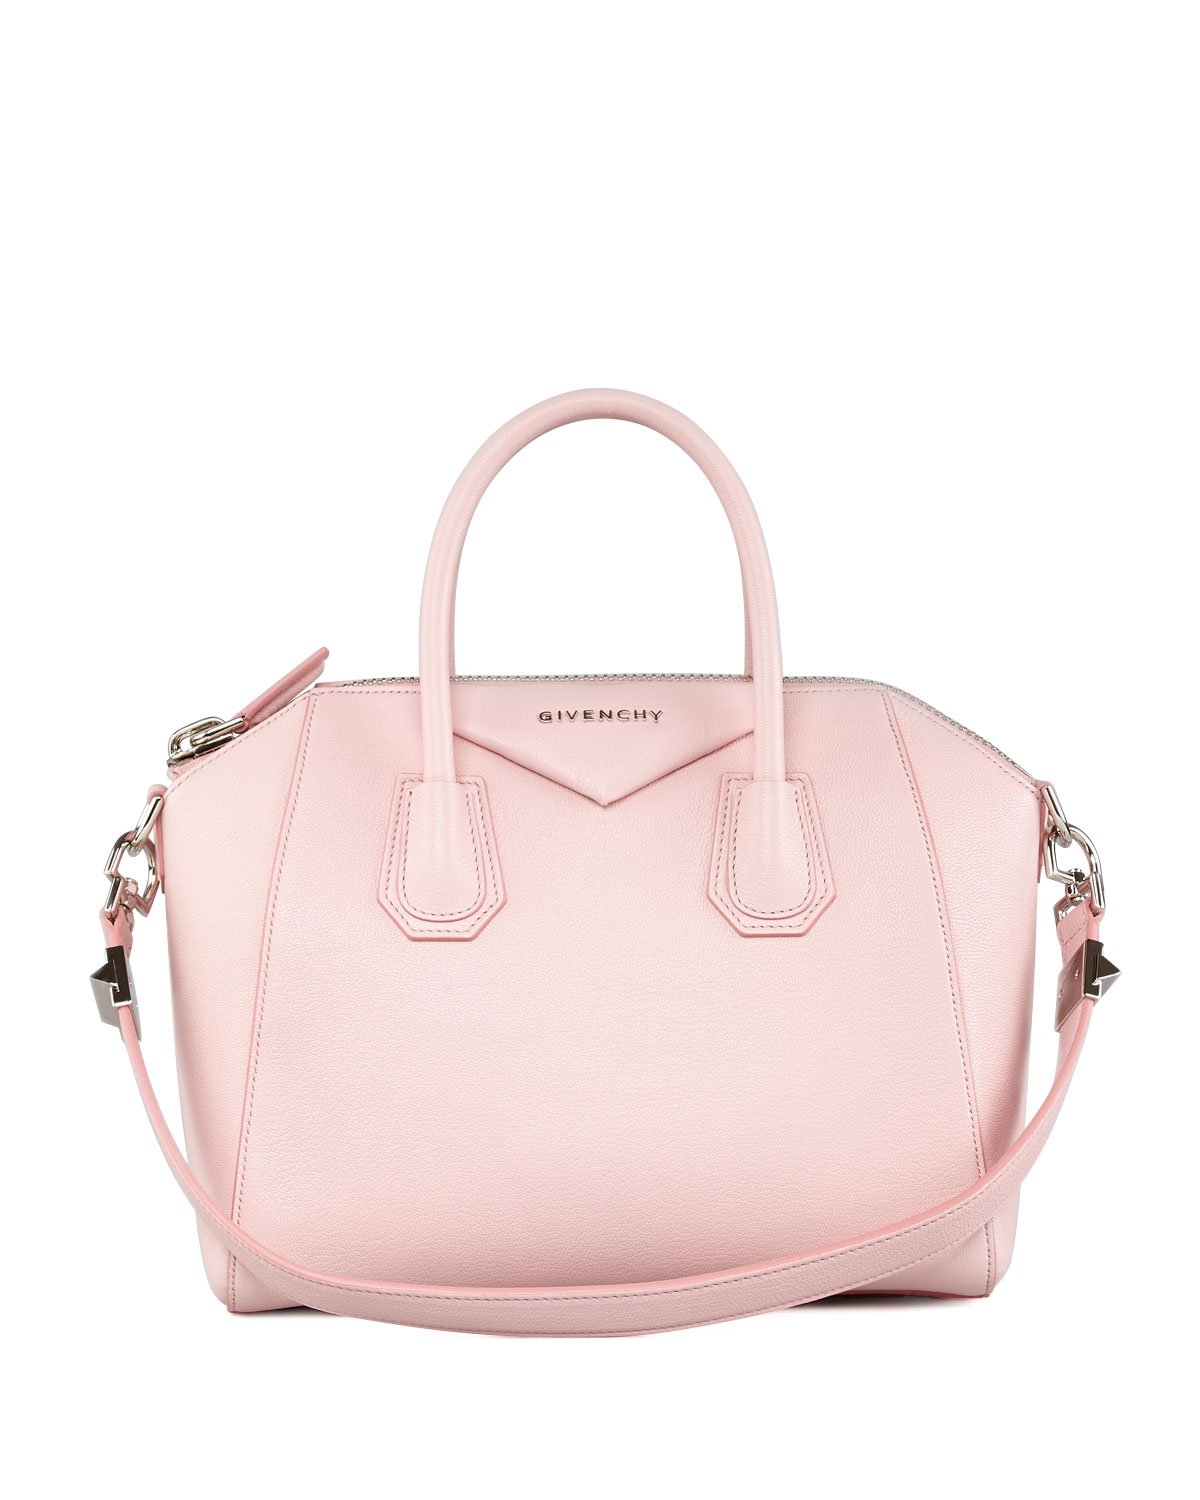 Givenchy Mini Antigona Tote in Light Pink (Pink) - Lyst